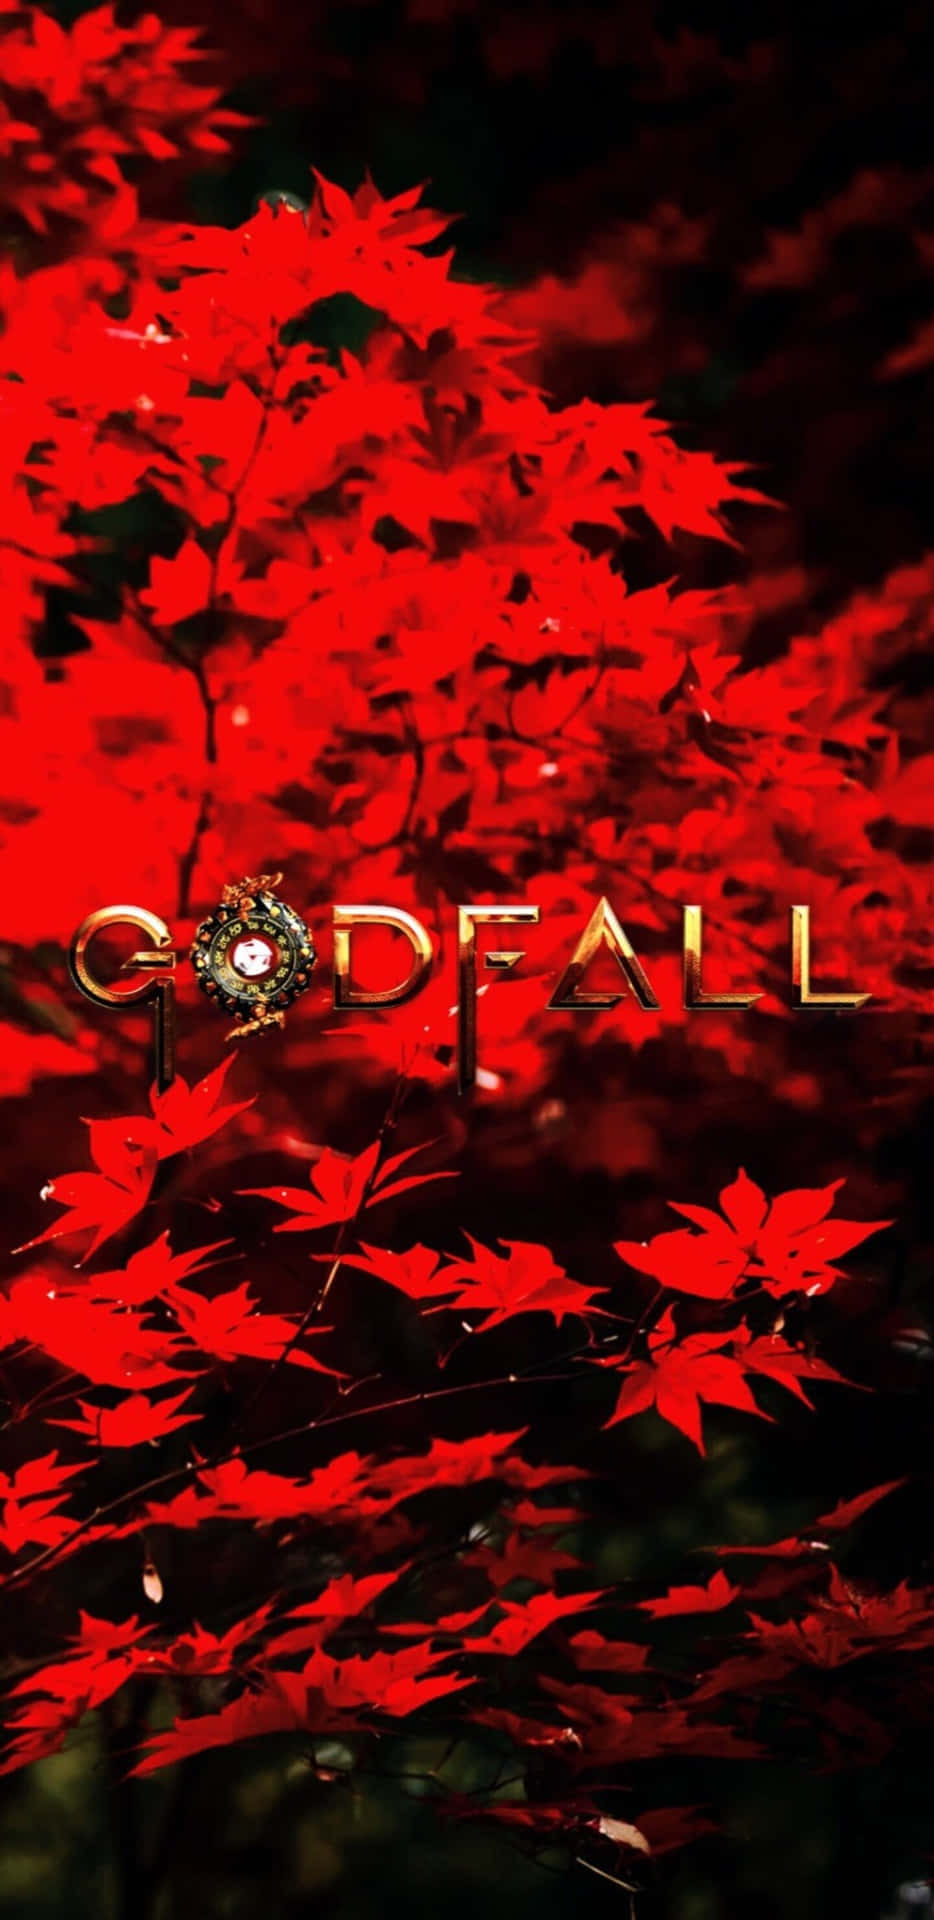 Godfall - A Red Leaf In The Background